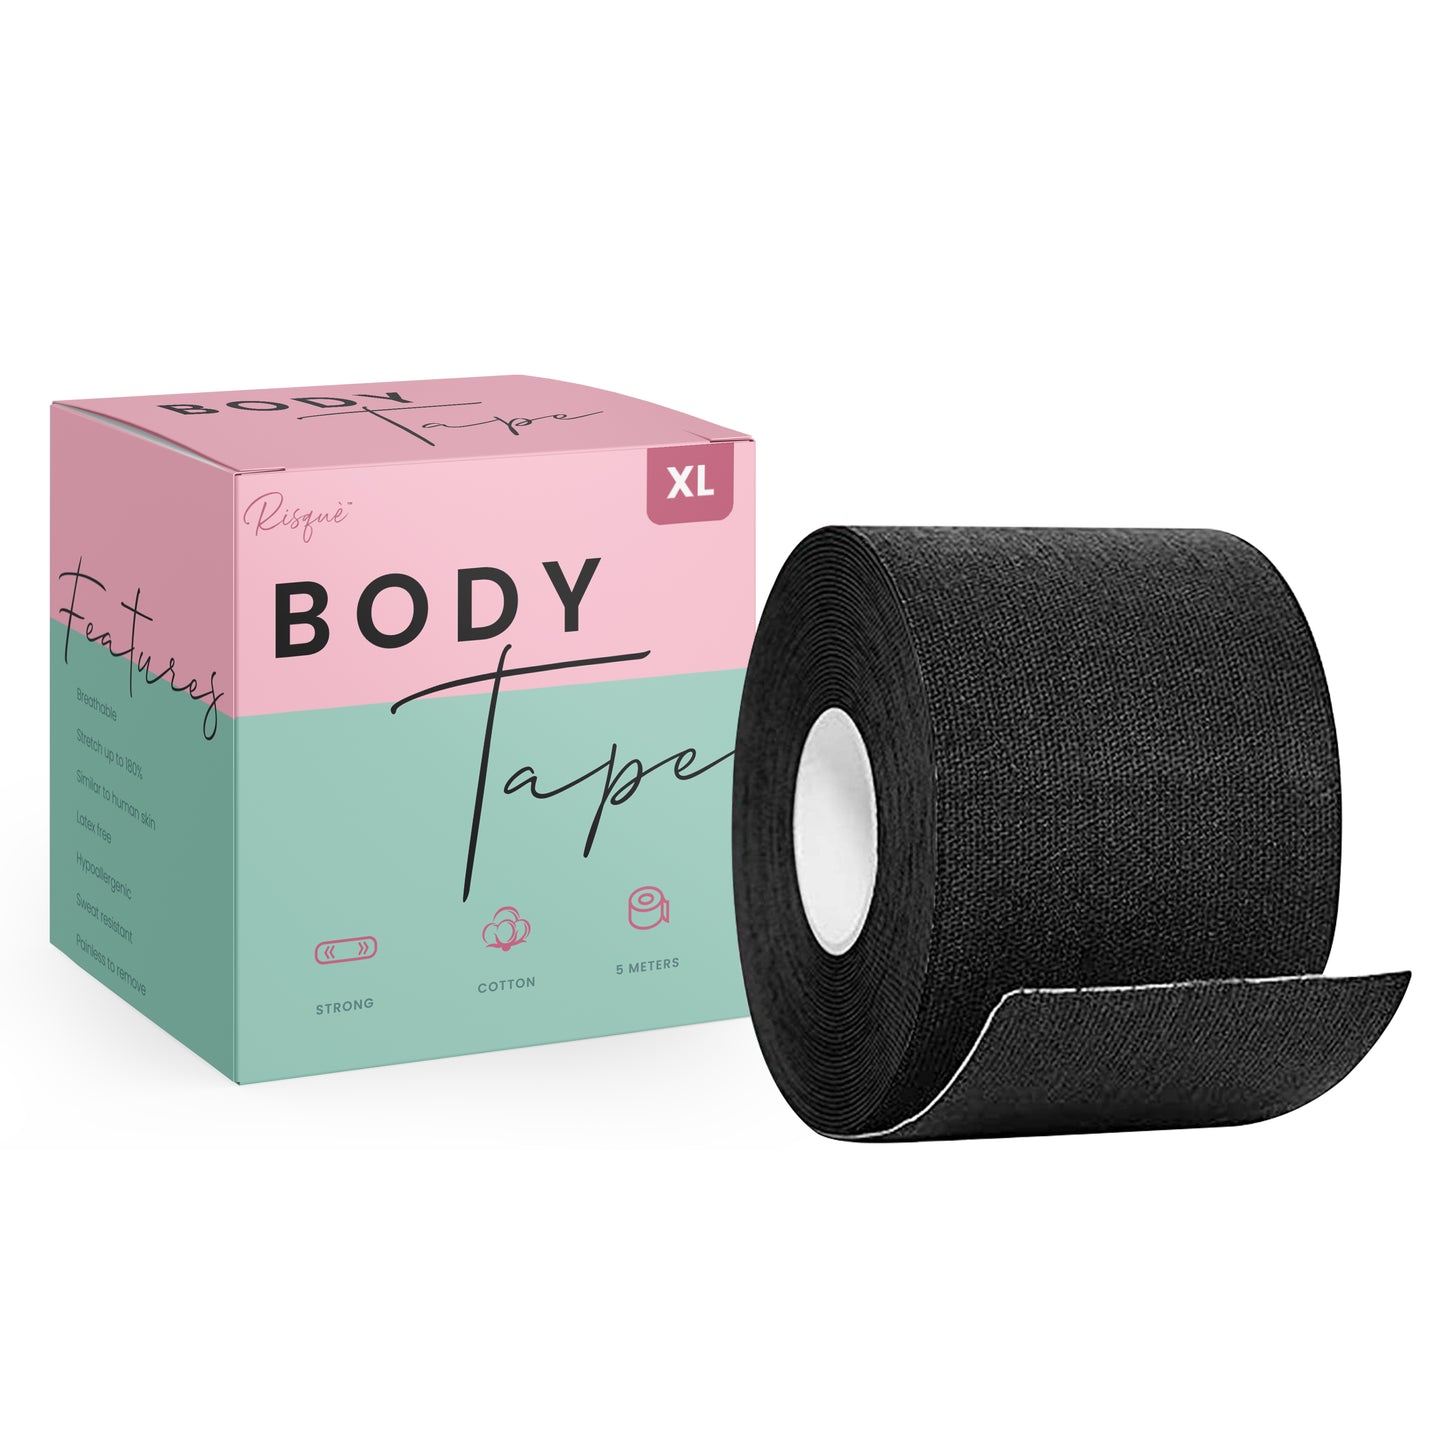 Hampton Adams XL Breast Lift Tape - Body Tape (Made for large breasts)